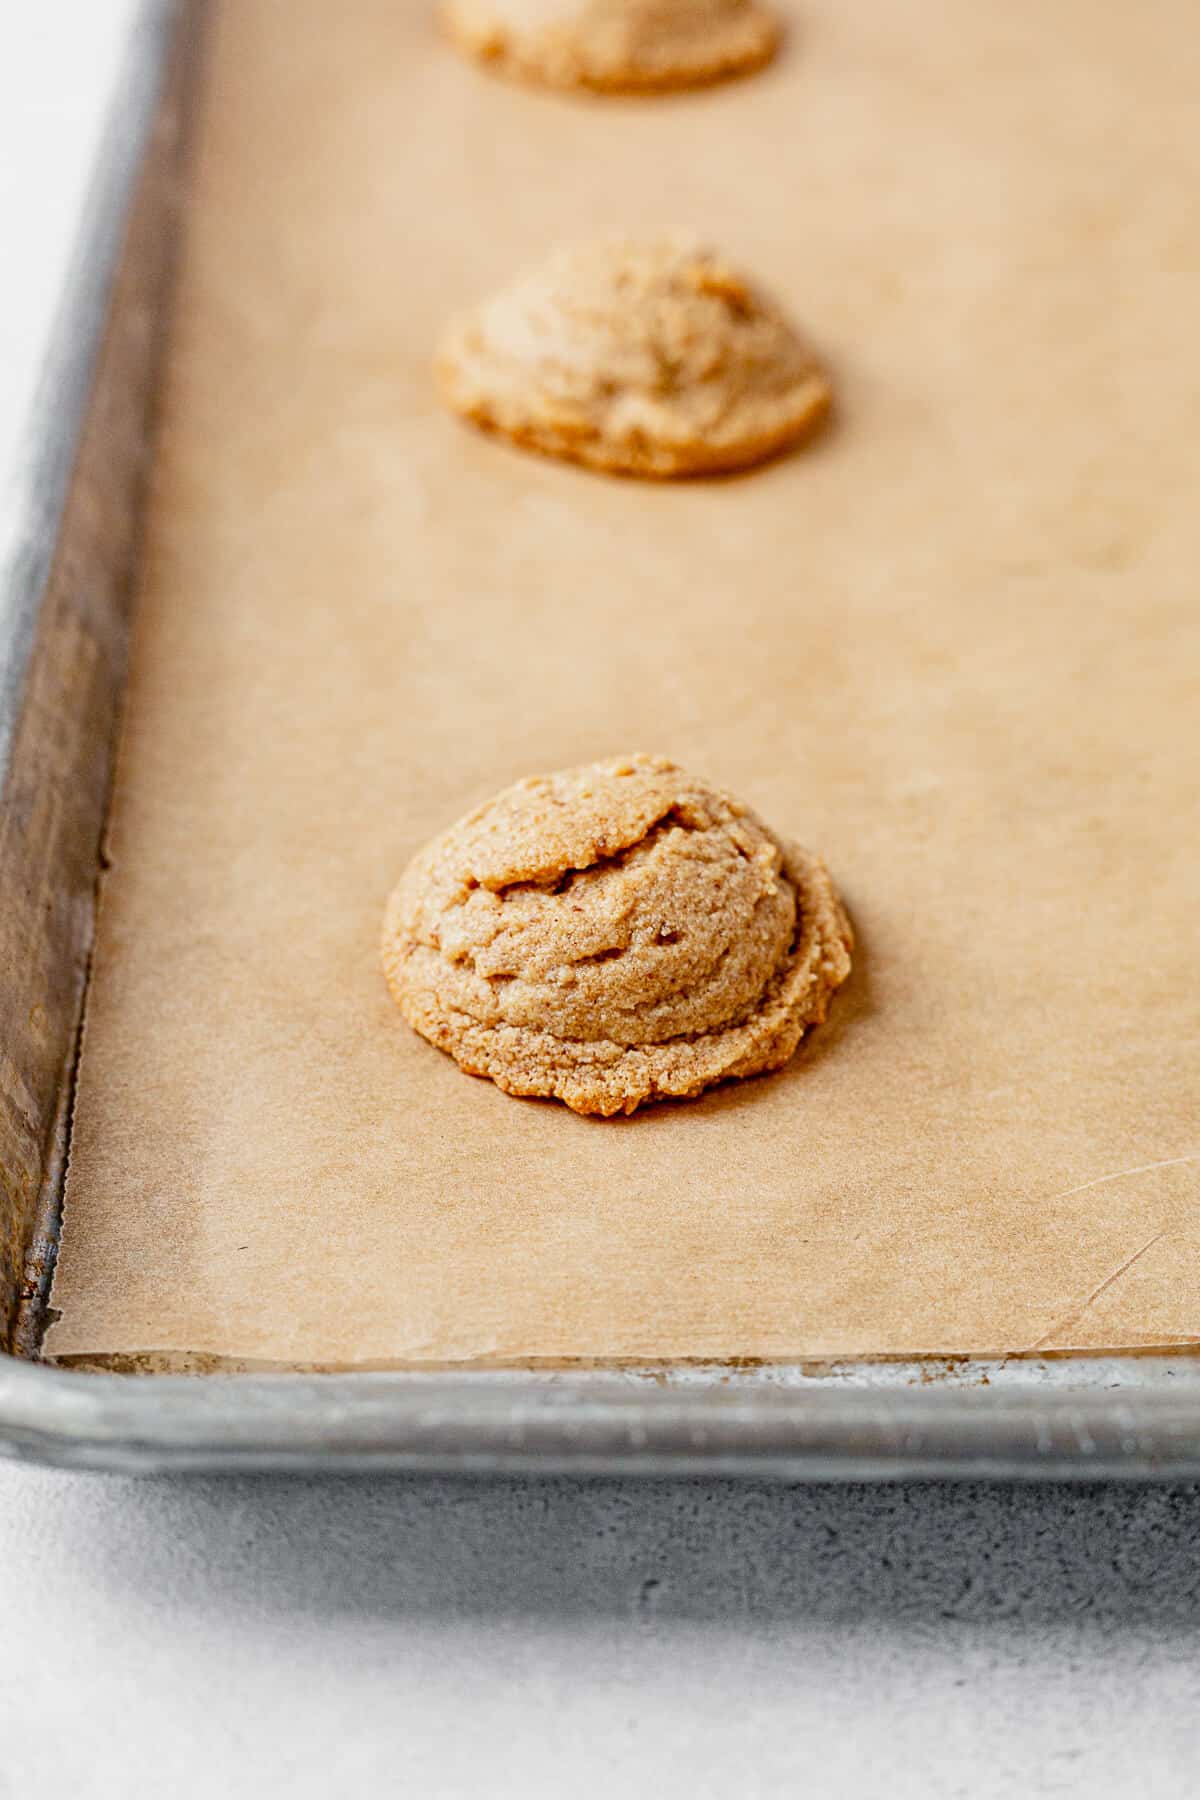 freshly baked almond flour peanut butter cookies on a parchment lined baking sheet